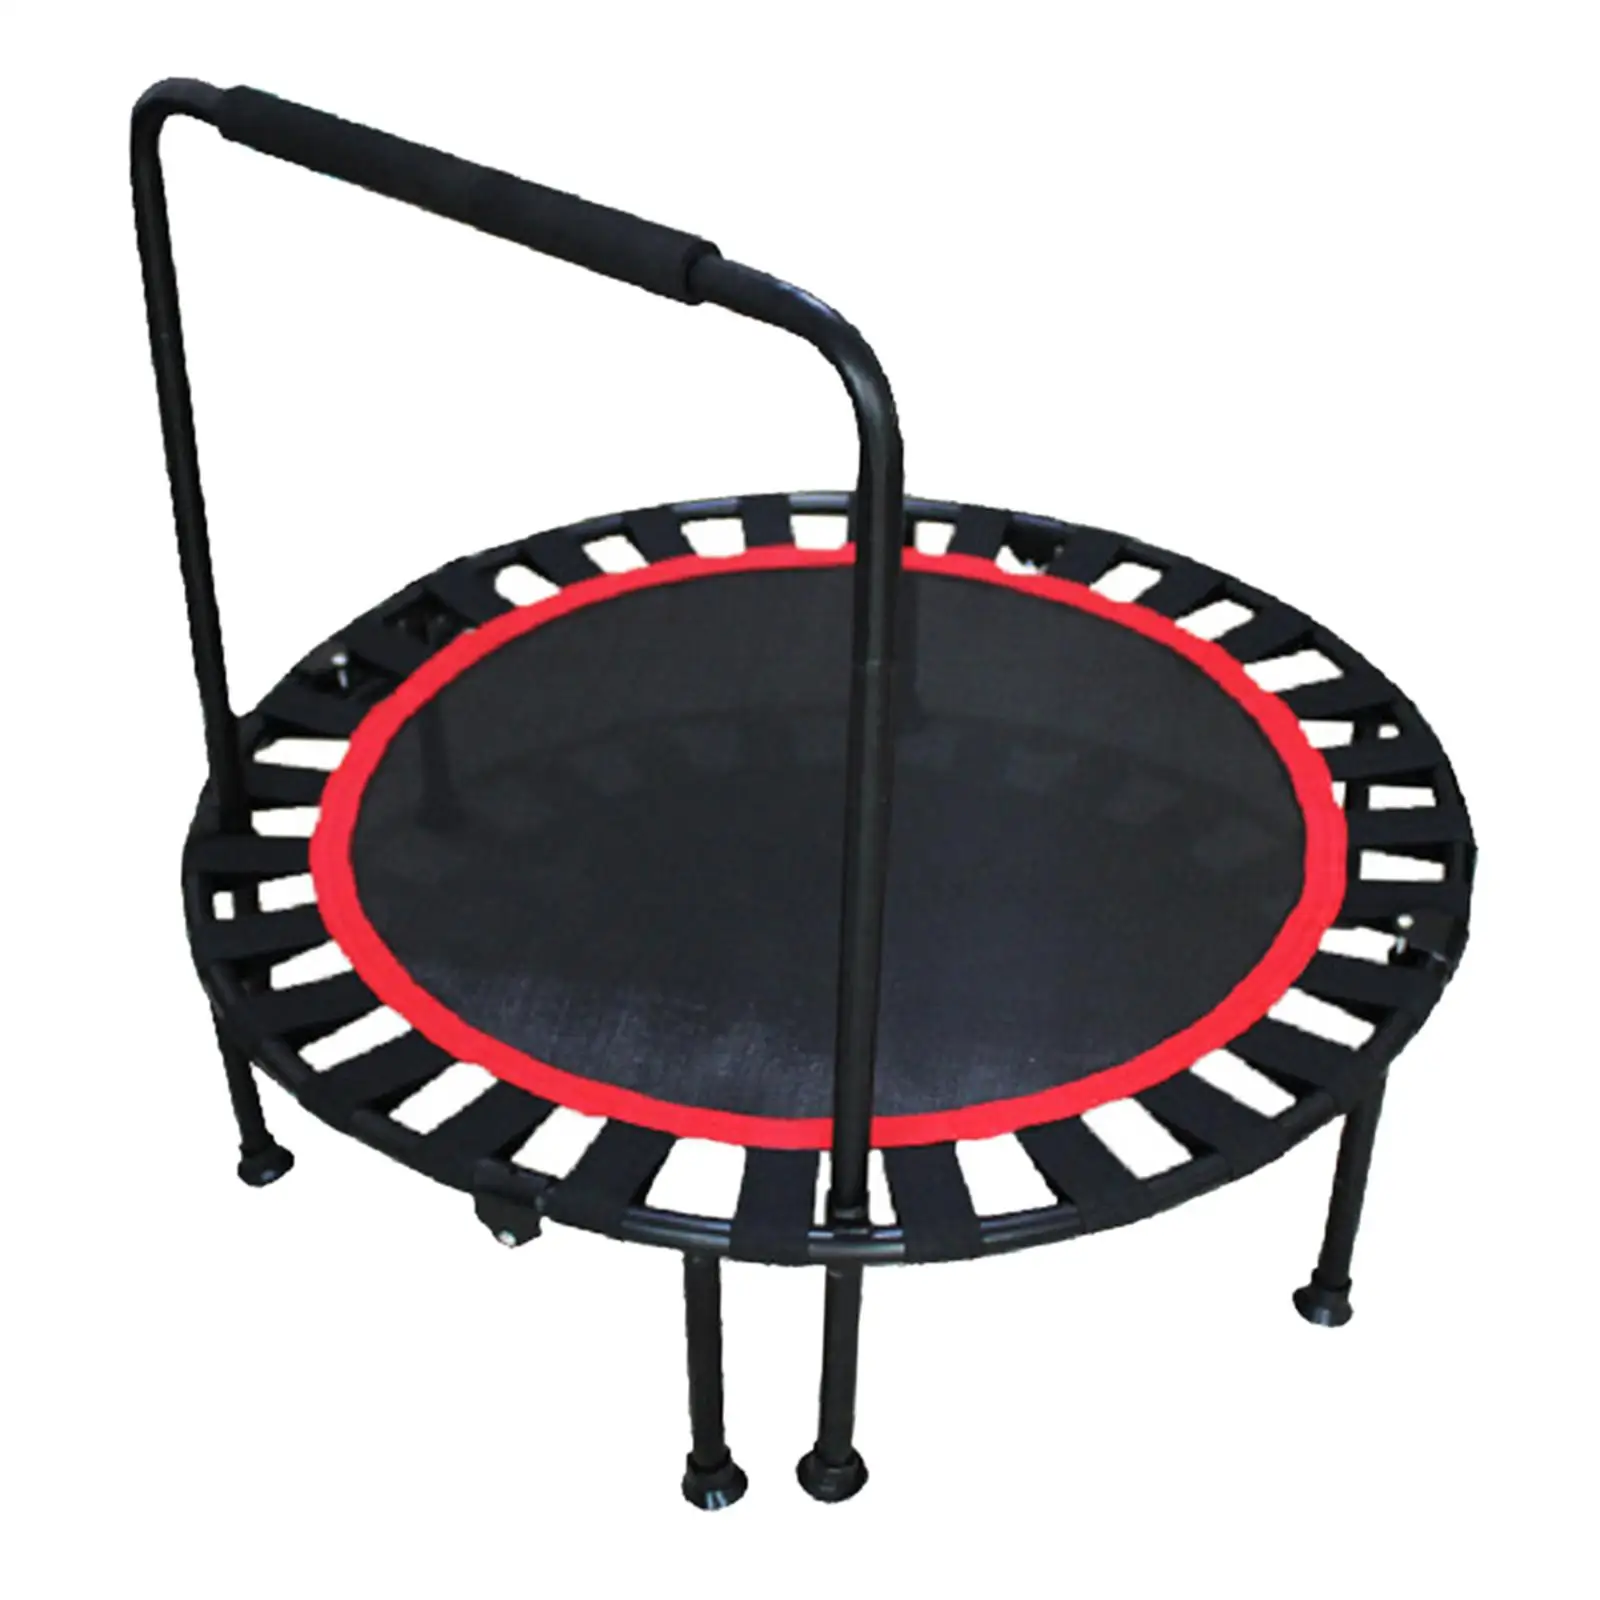 Jumping Mats Fitness Long Lasting Safety Toy Boy Girl Kids Round Trampoline